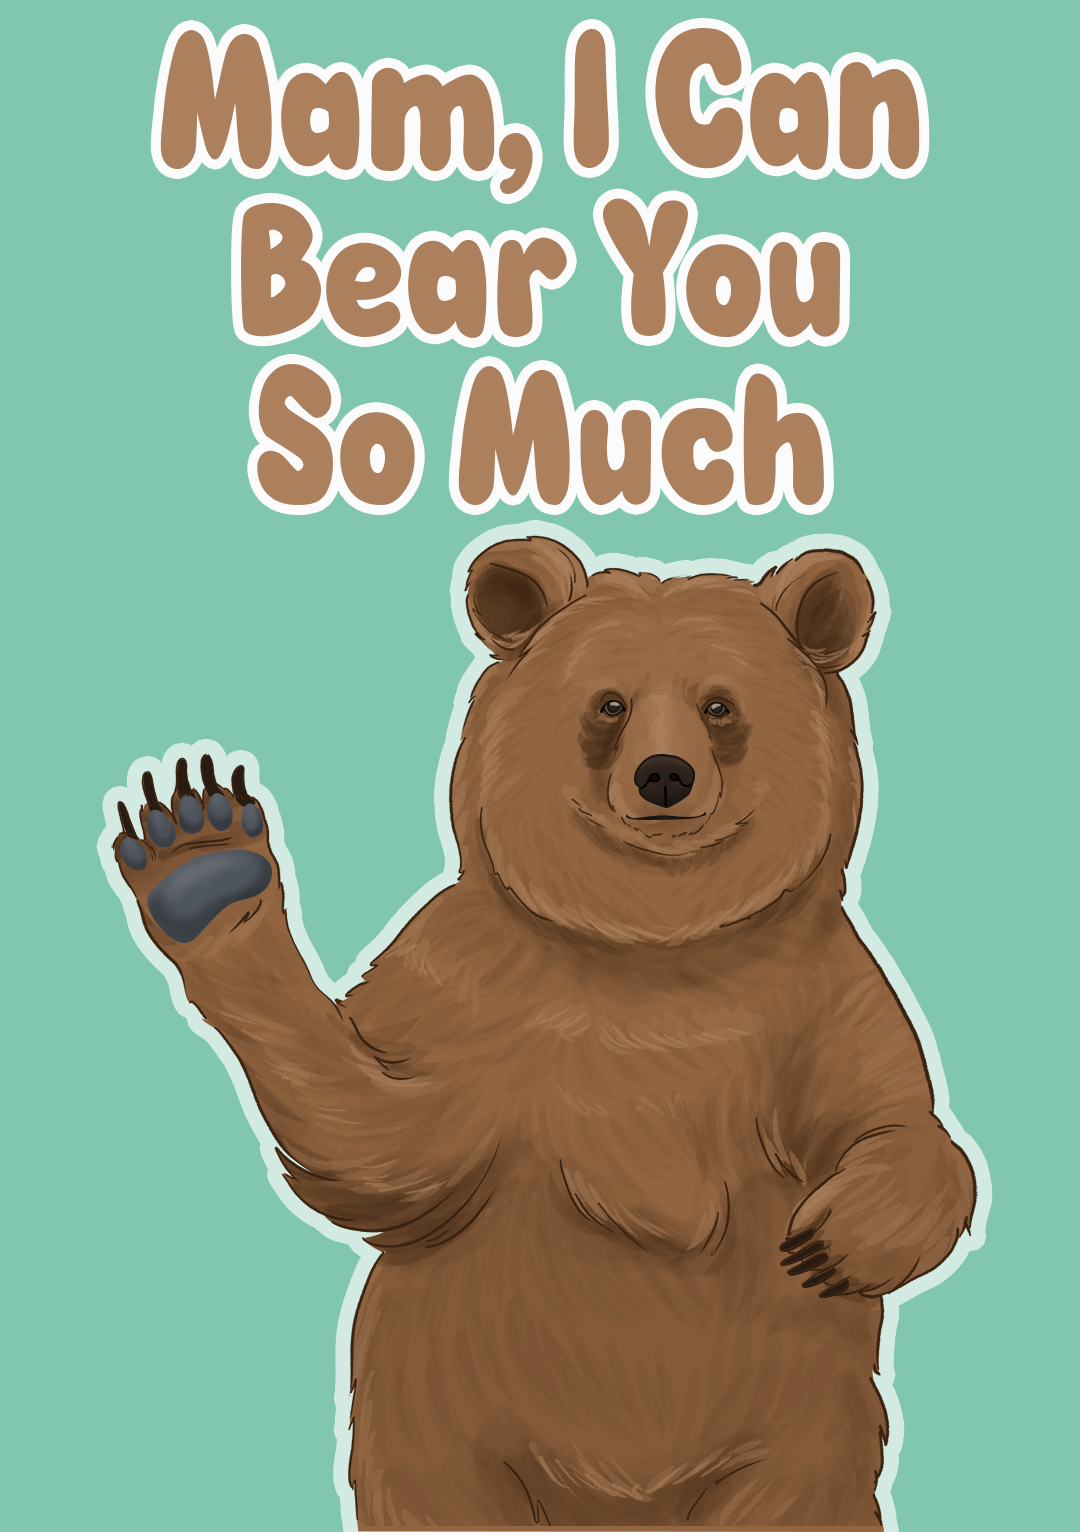 Mam, I Can Bear You So Much...